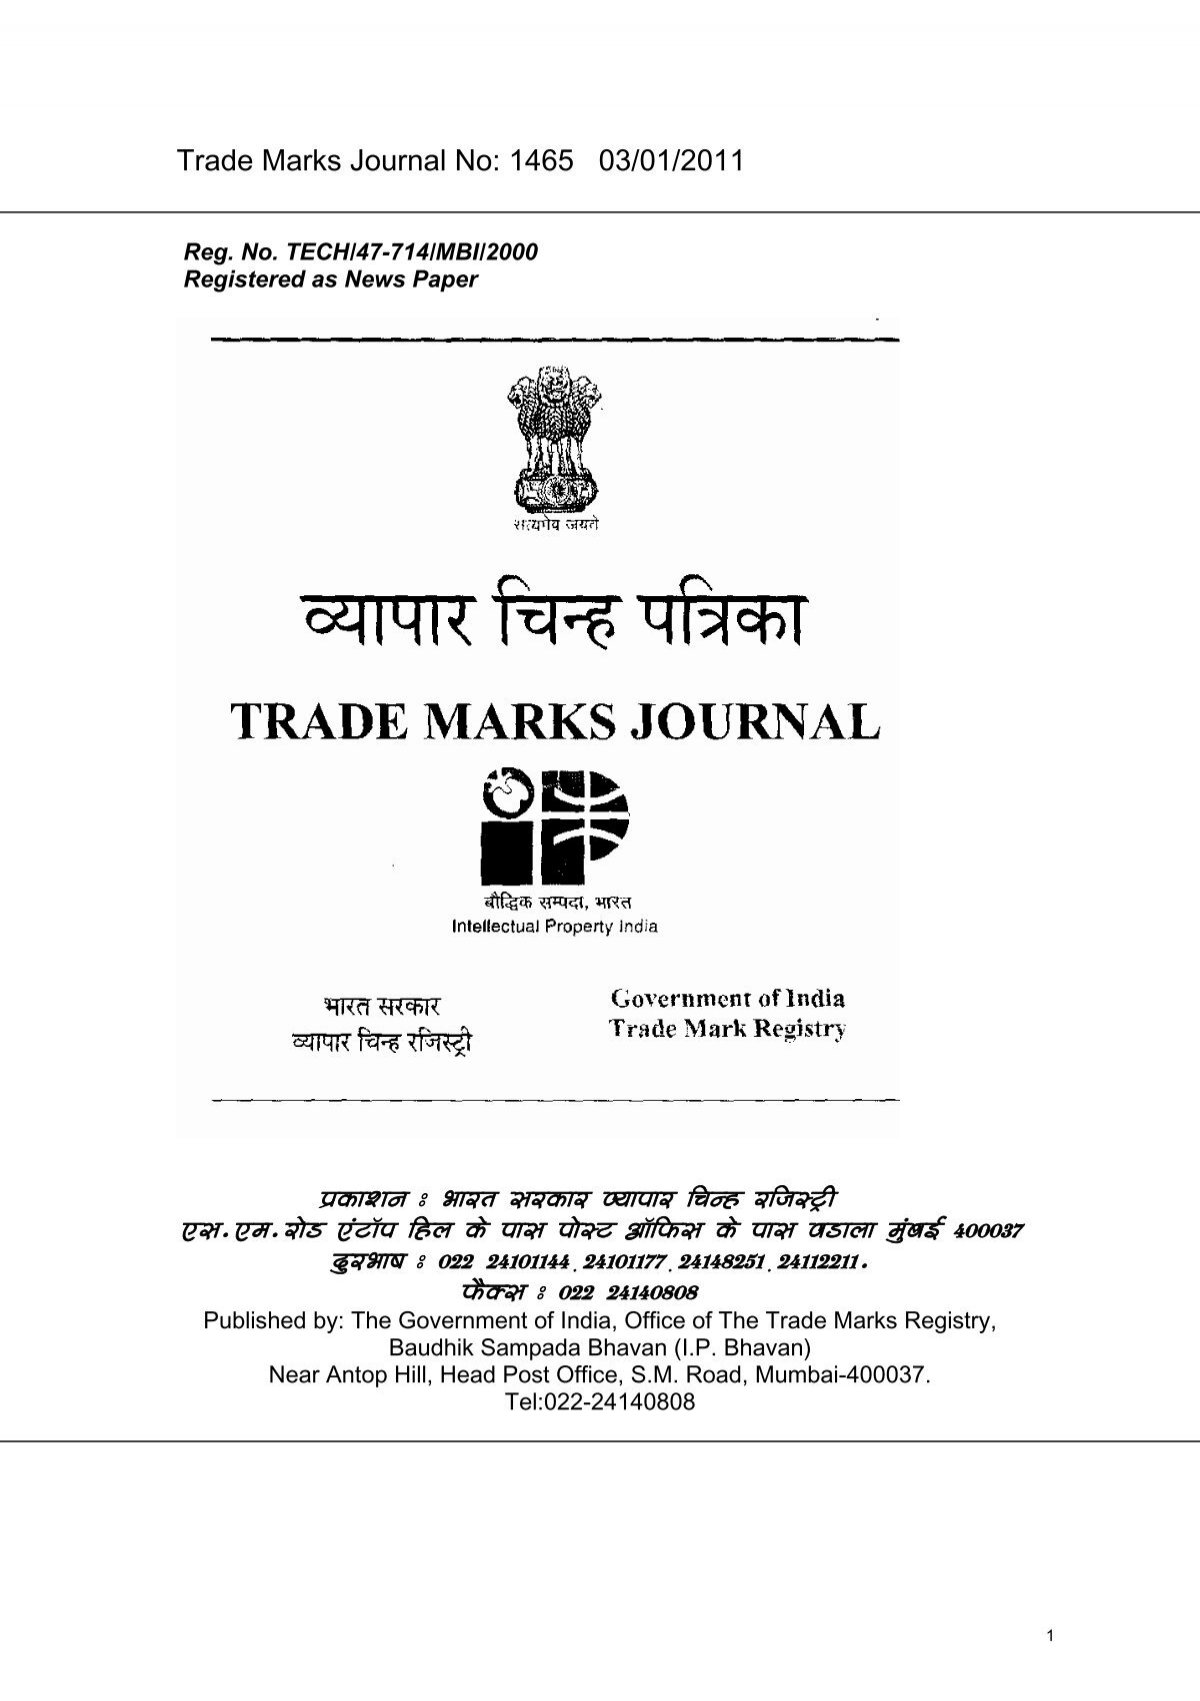 Trade Marks Journal No: 1465 03/01/2011 - Controller General of